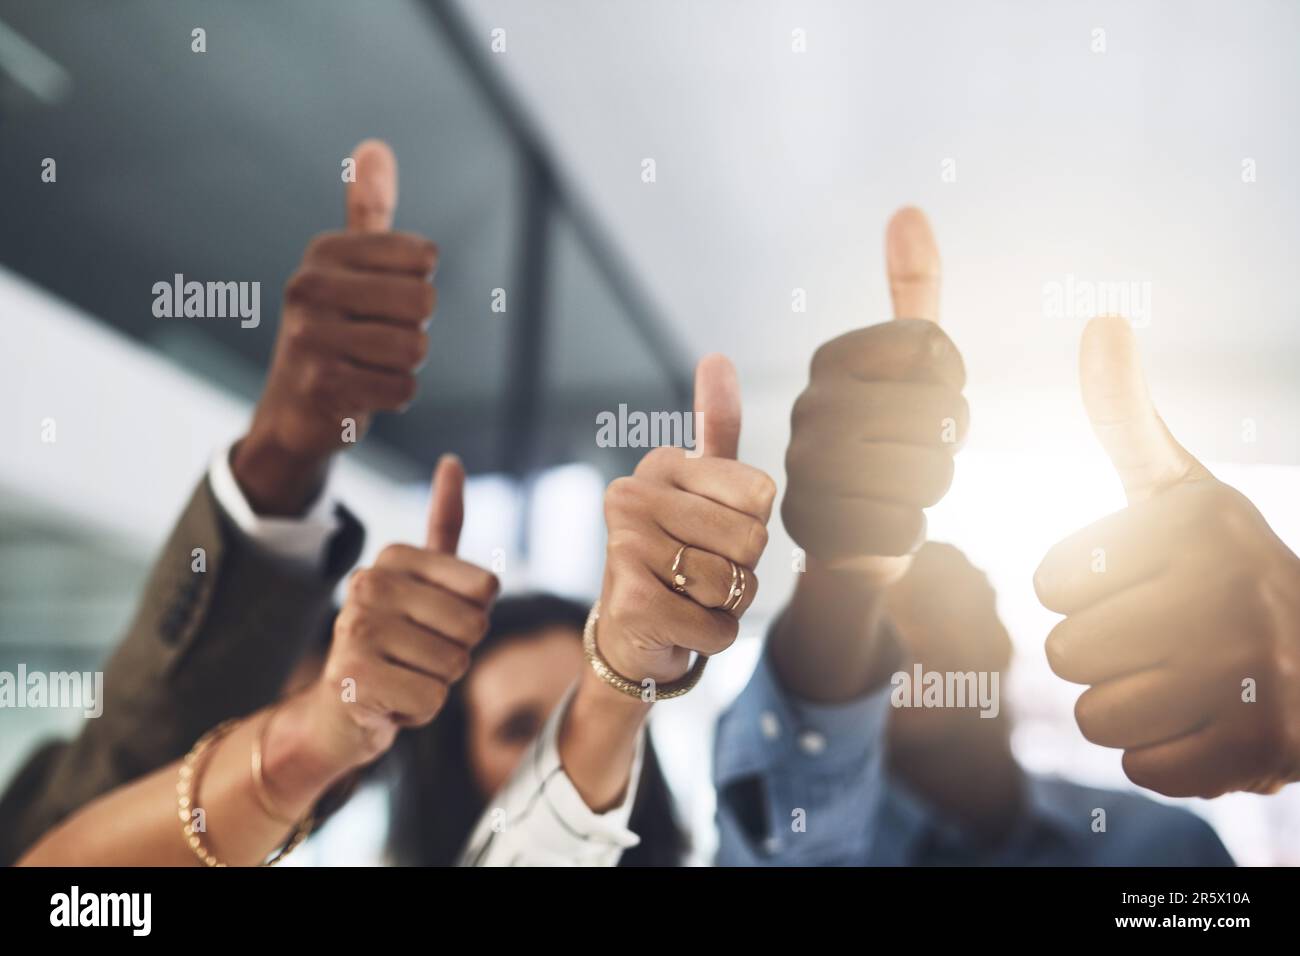 You should be proud of your achievements. Closeup shot of a group of businesspeople showing thumbs up in an office. Stock Photo